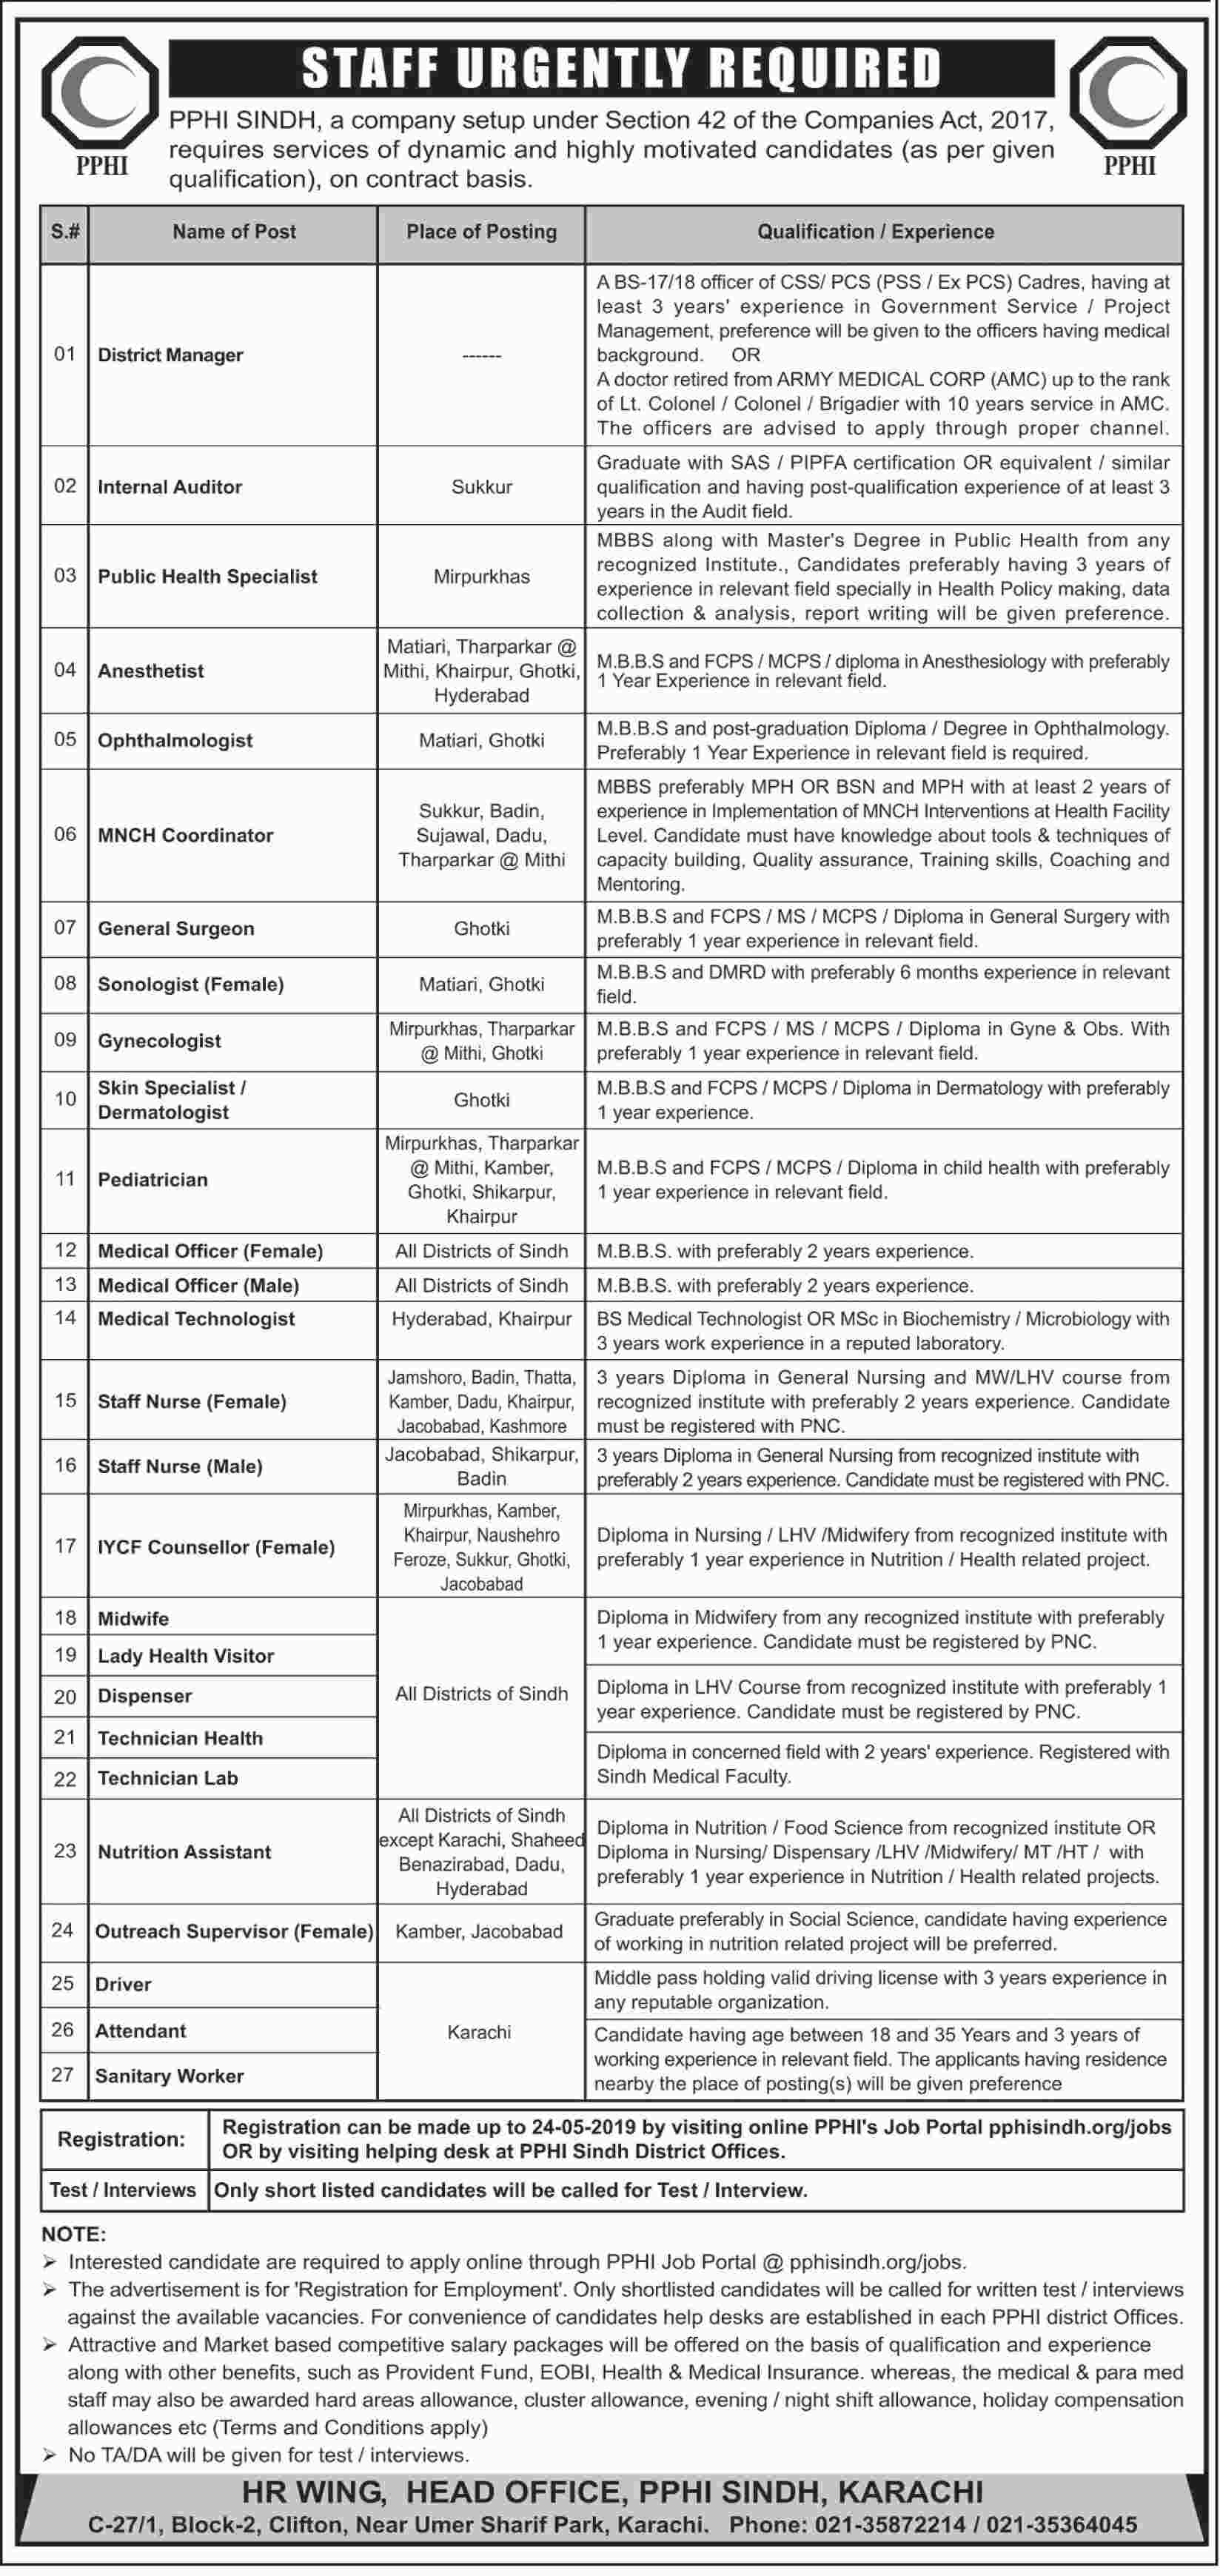 Get a Latest Jobs In PPHI Sindh 2019